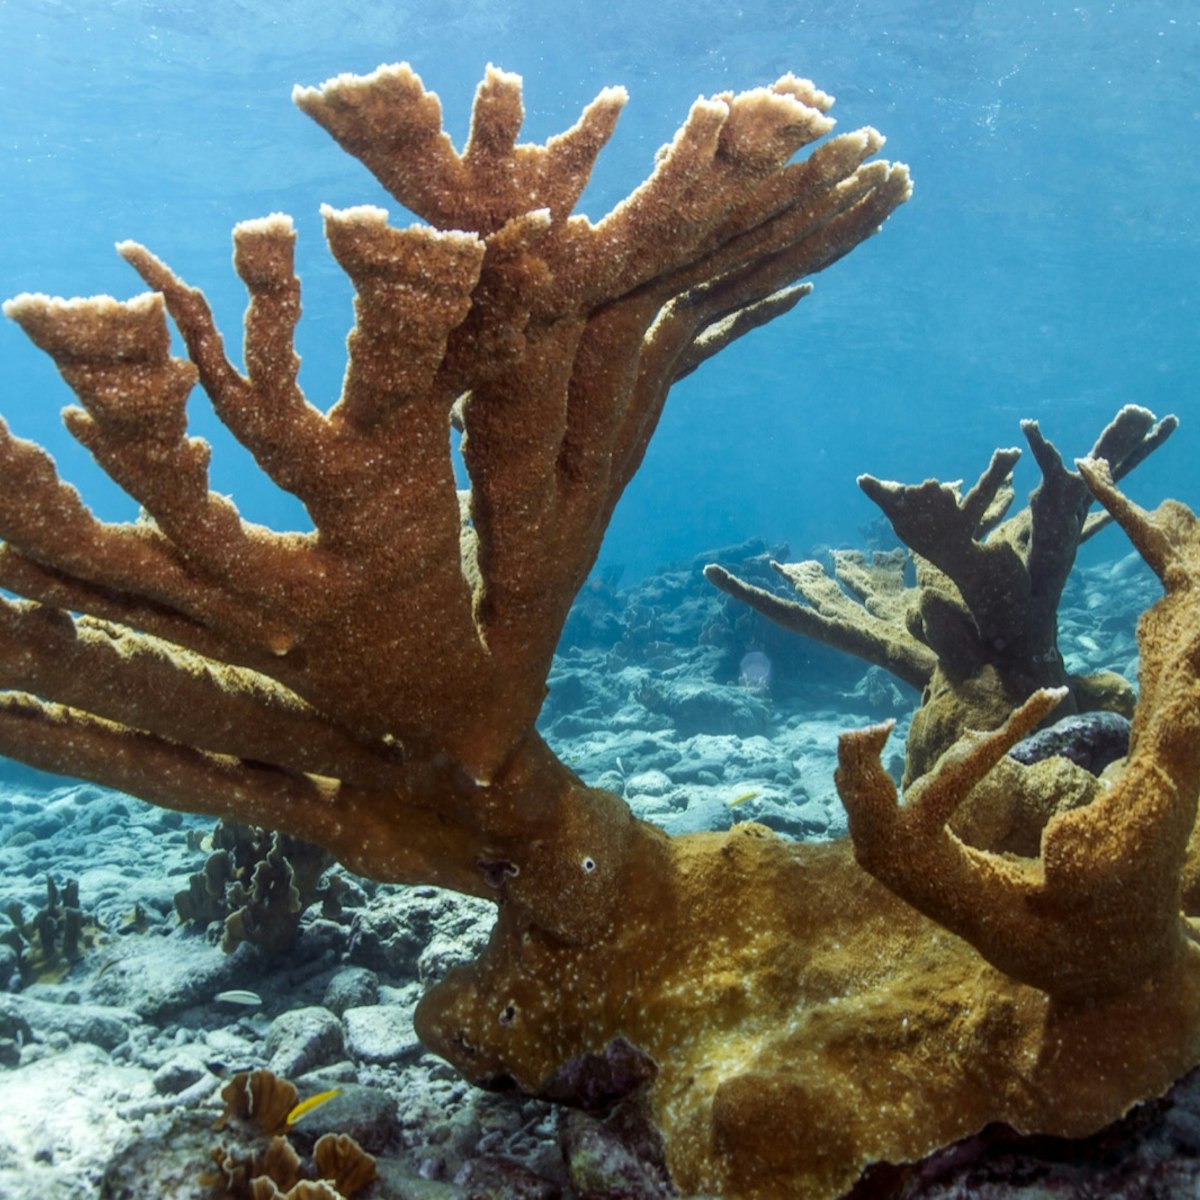 Coral reef Elkhorn coral (Acropora palmata) on coral reef in Bonaire; Shutterstock ID 155480753; Your name (First / Last): Alicia Johnson; GL account no.: 65050; Netsuite department name: Online Editorial ; Full Product or Project name including edition: Bonaire